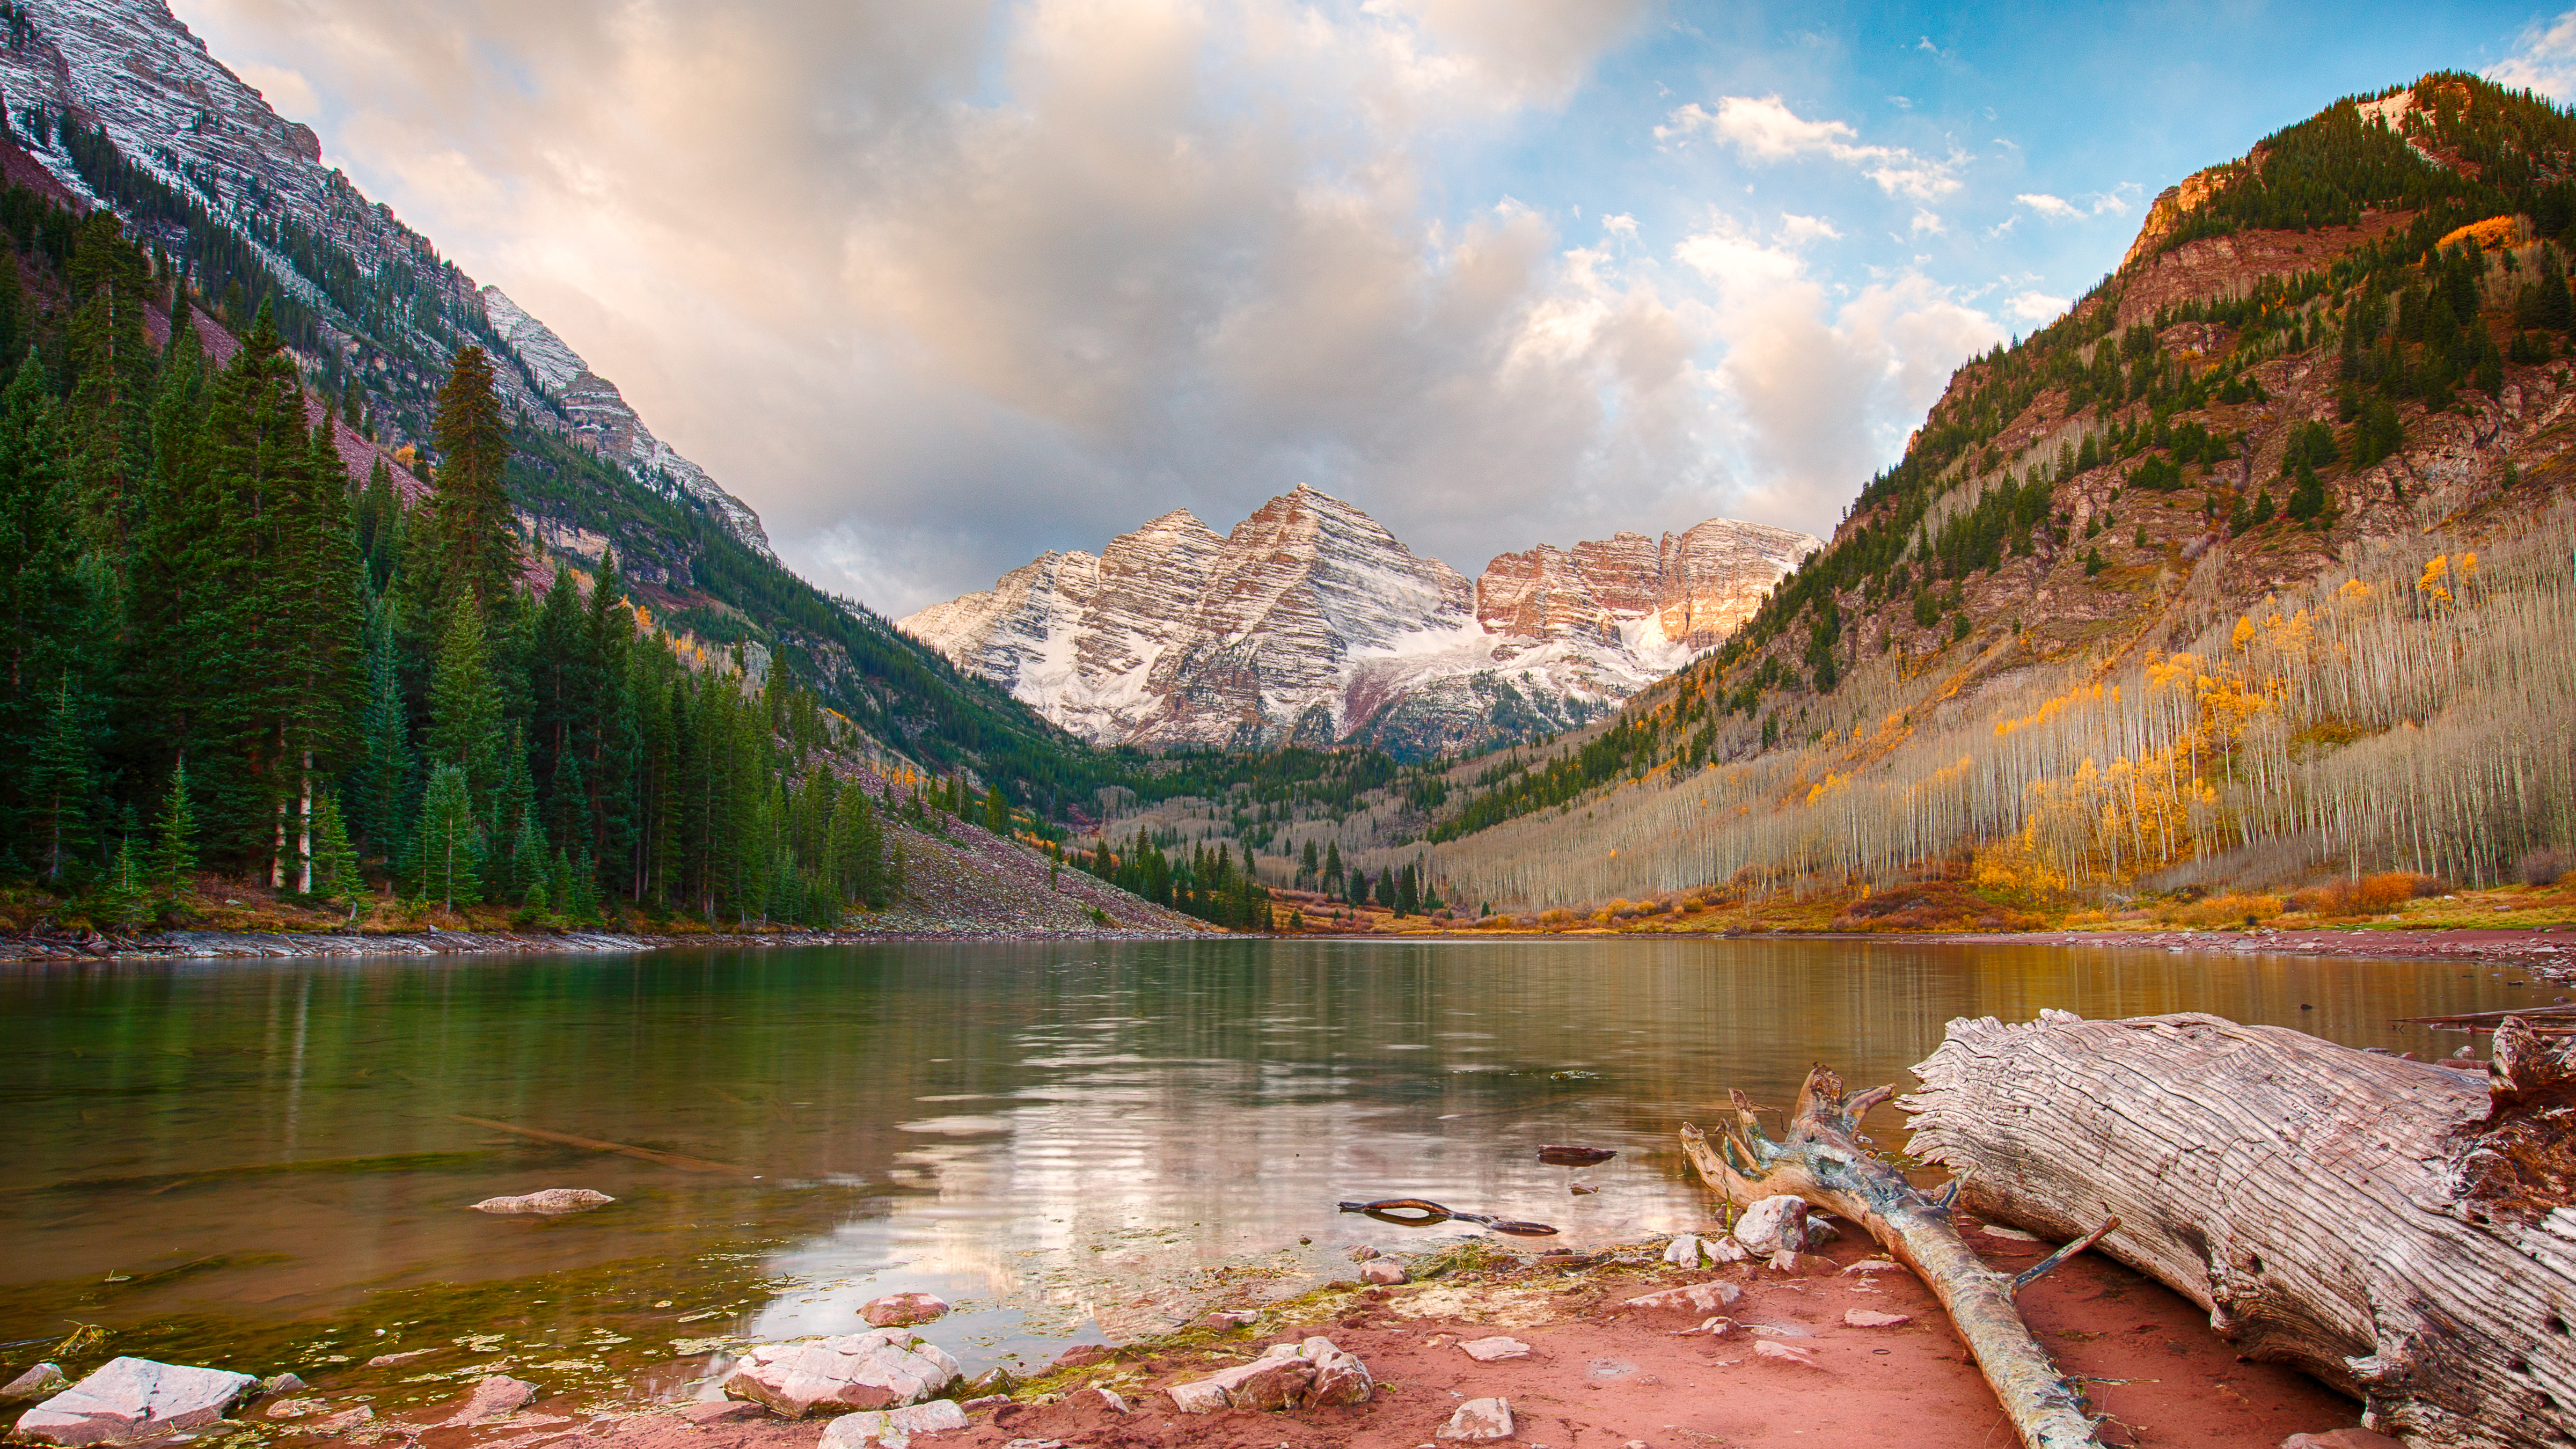 General 4800x2700 Colorado USA Aspen Maroon Bells mountains nature lake water reflection trees trunks log tree trunk sky clouds